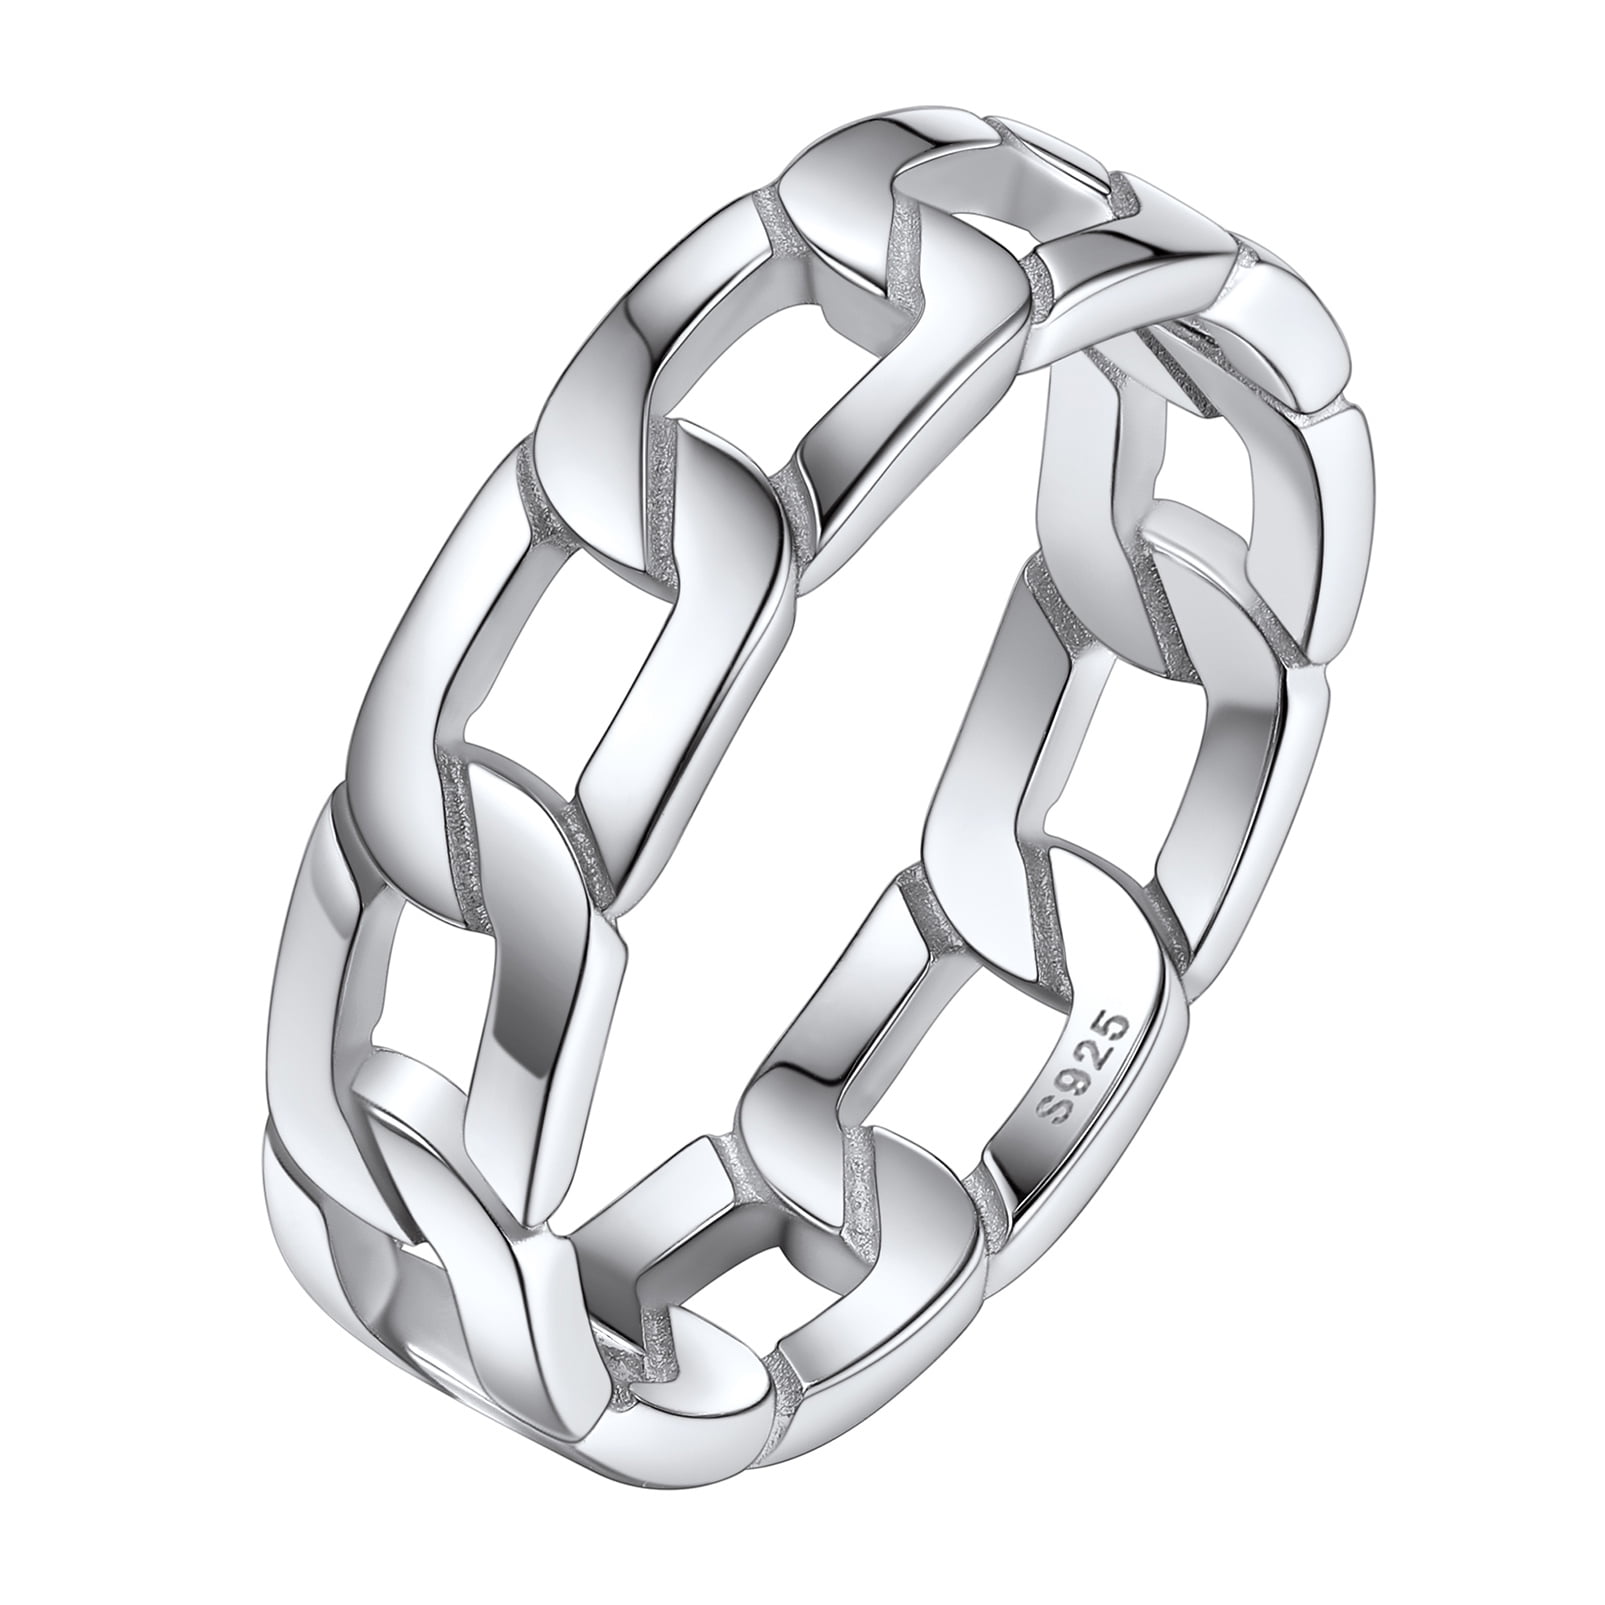 Lukas Czaplewski on LinkedIn: Updated render #3 - a pair of sterling silver  Cuban link rings with bezel…